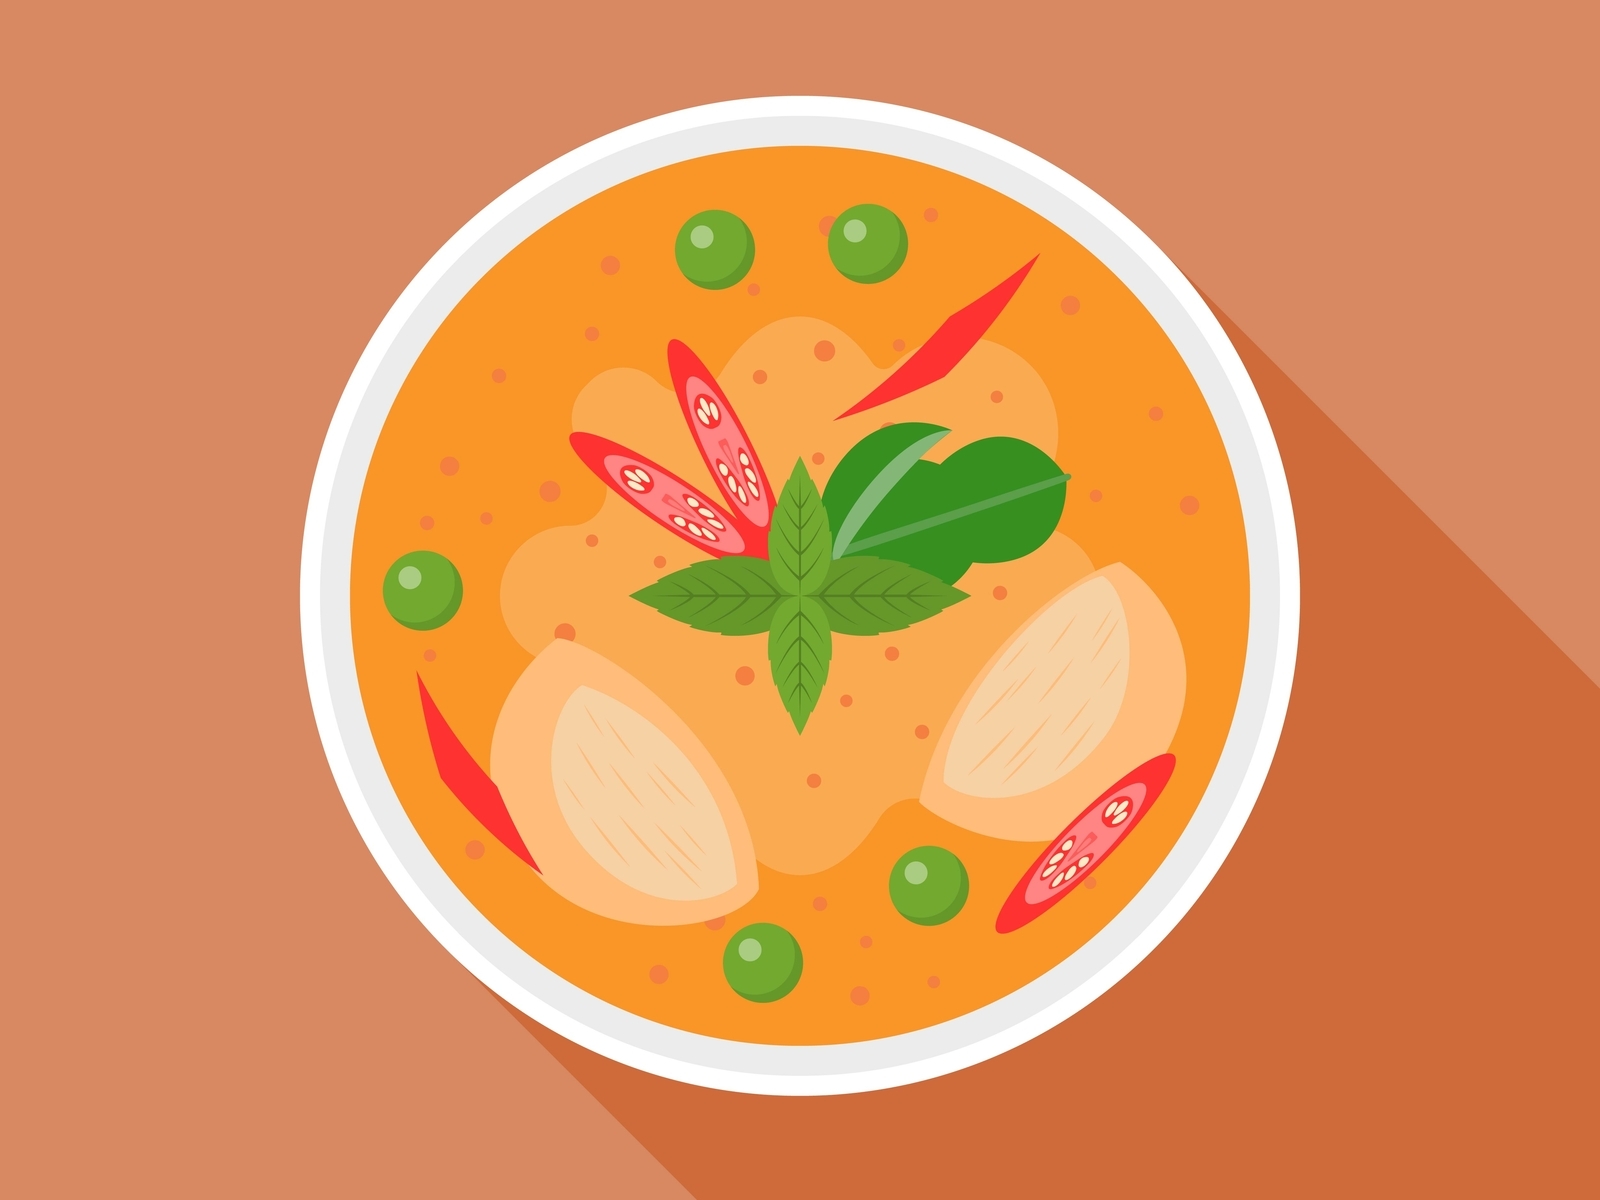 Red curry asian bangkok cuisine dishes flat flat design food food and drink illustration india thai thailand vector